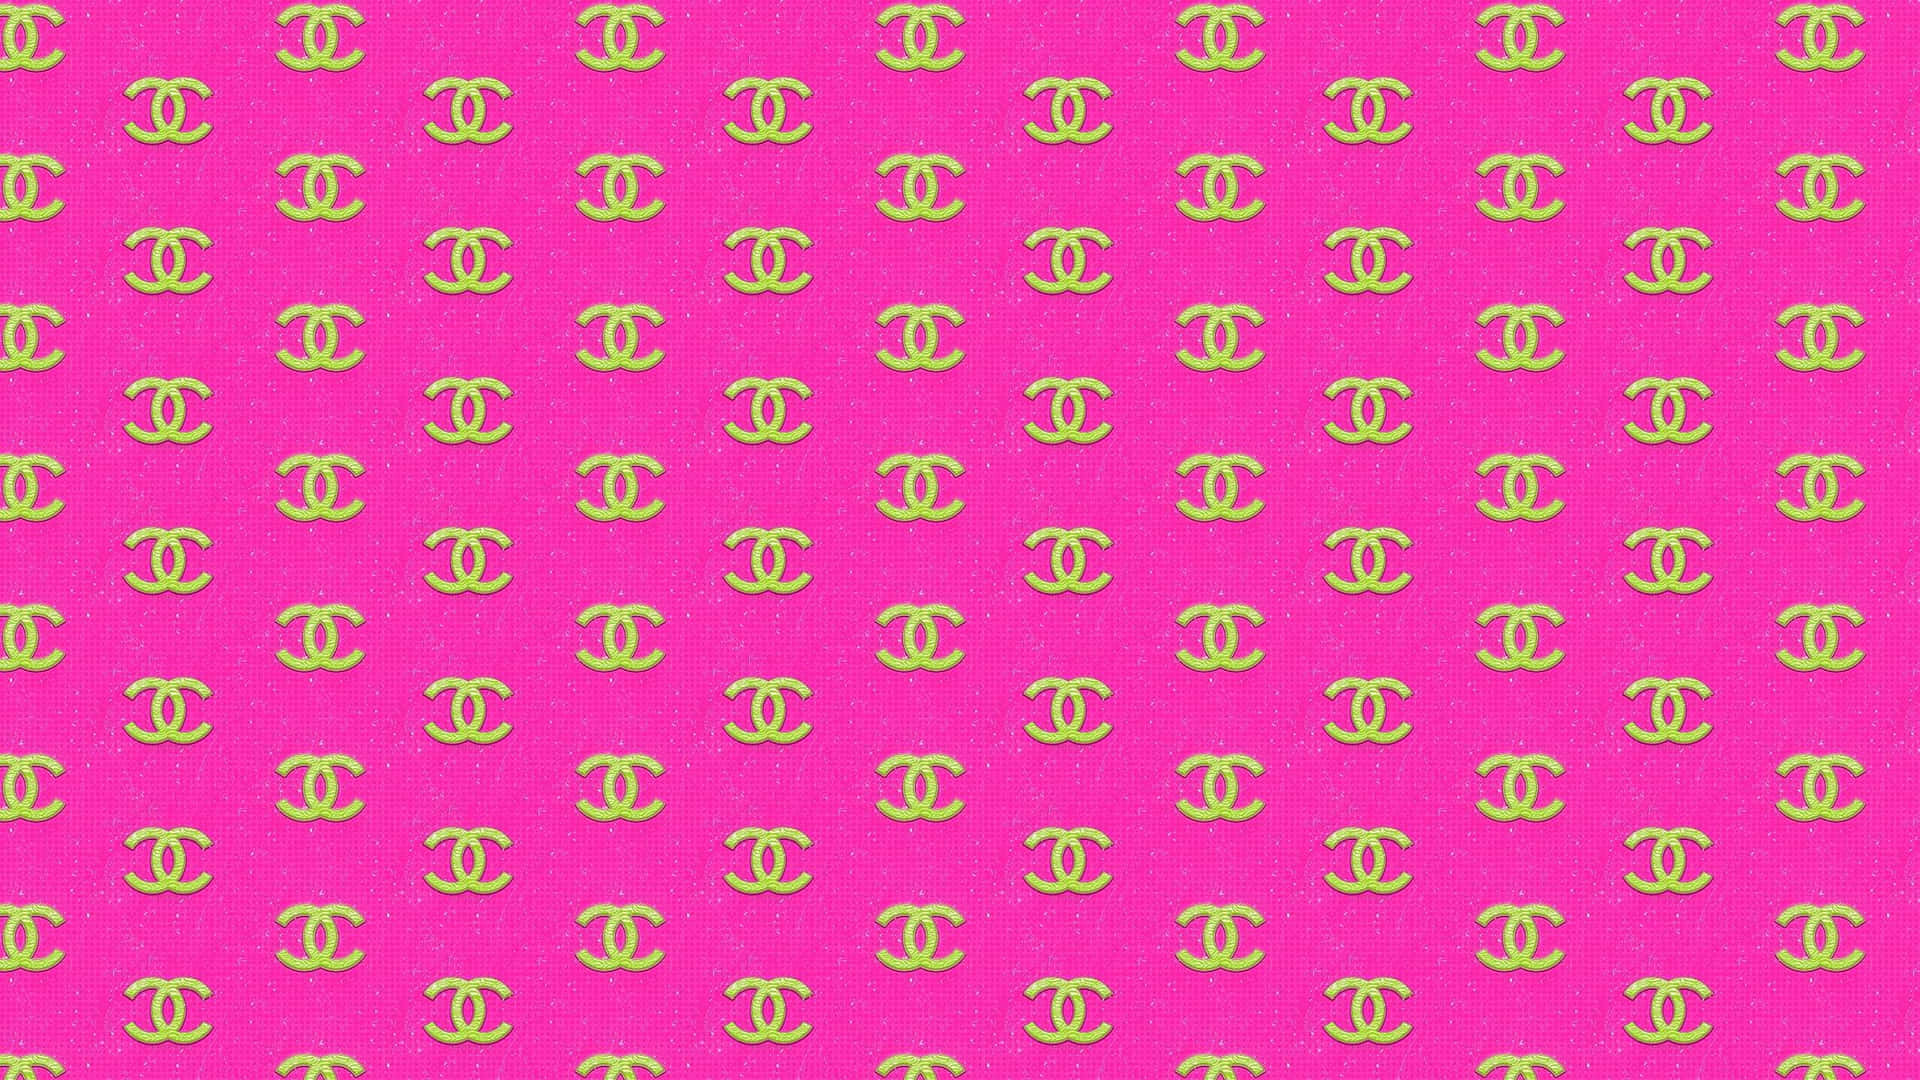 Celebrate your femininity with an iconic Chanel Girly design Wallpaper